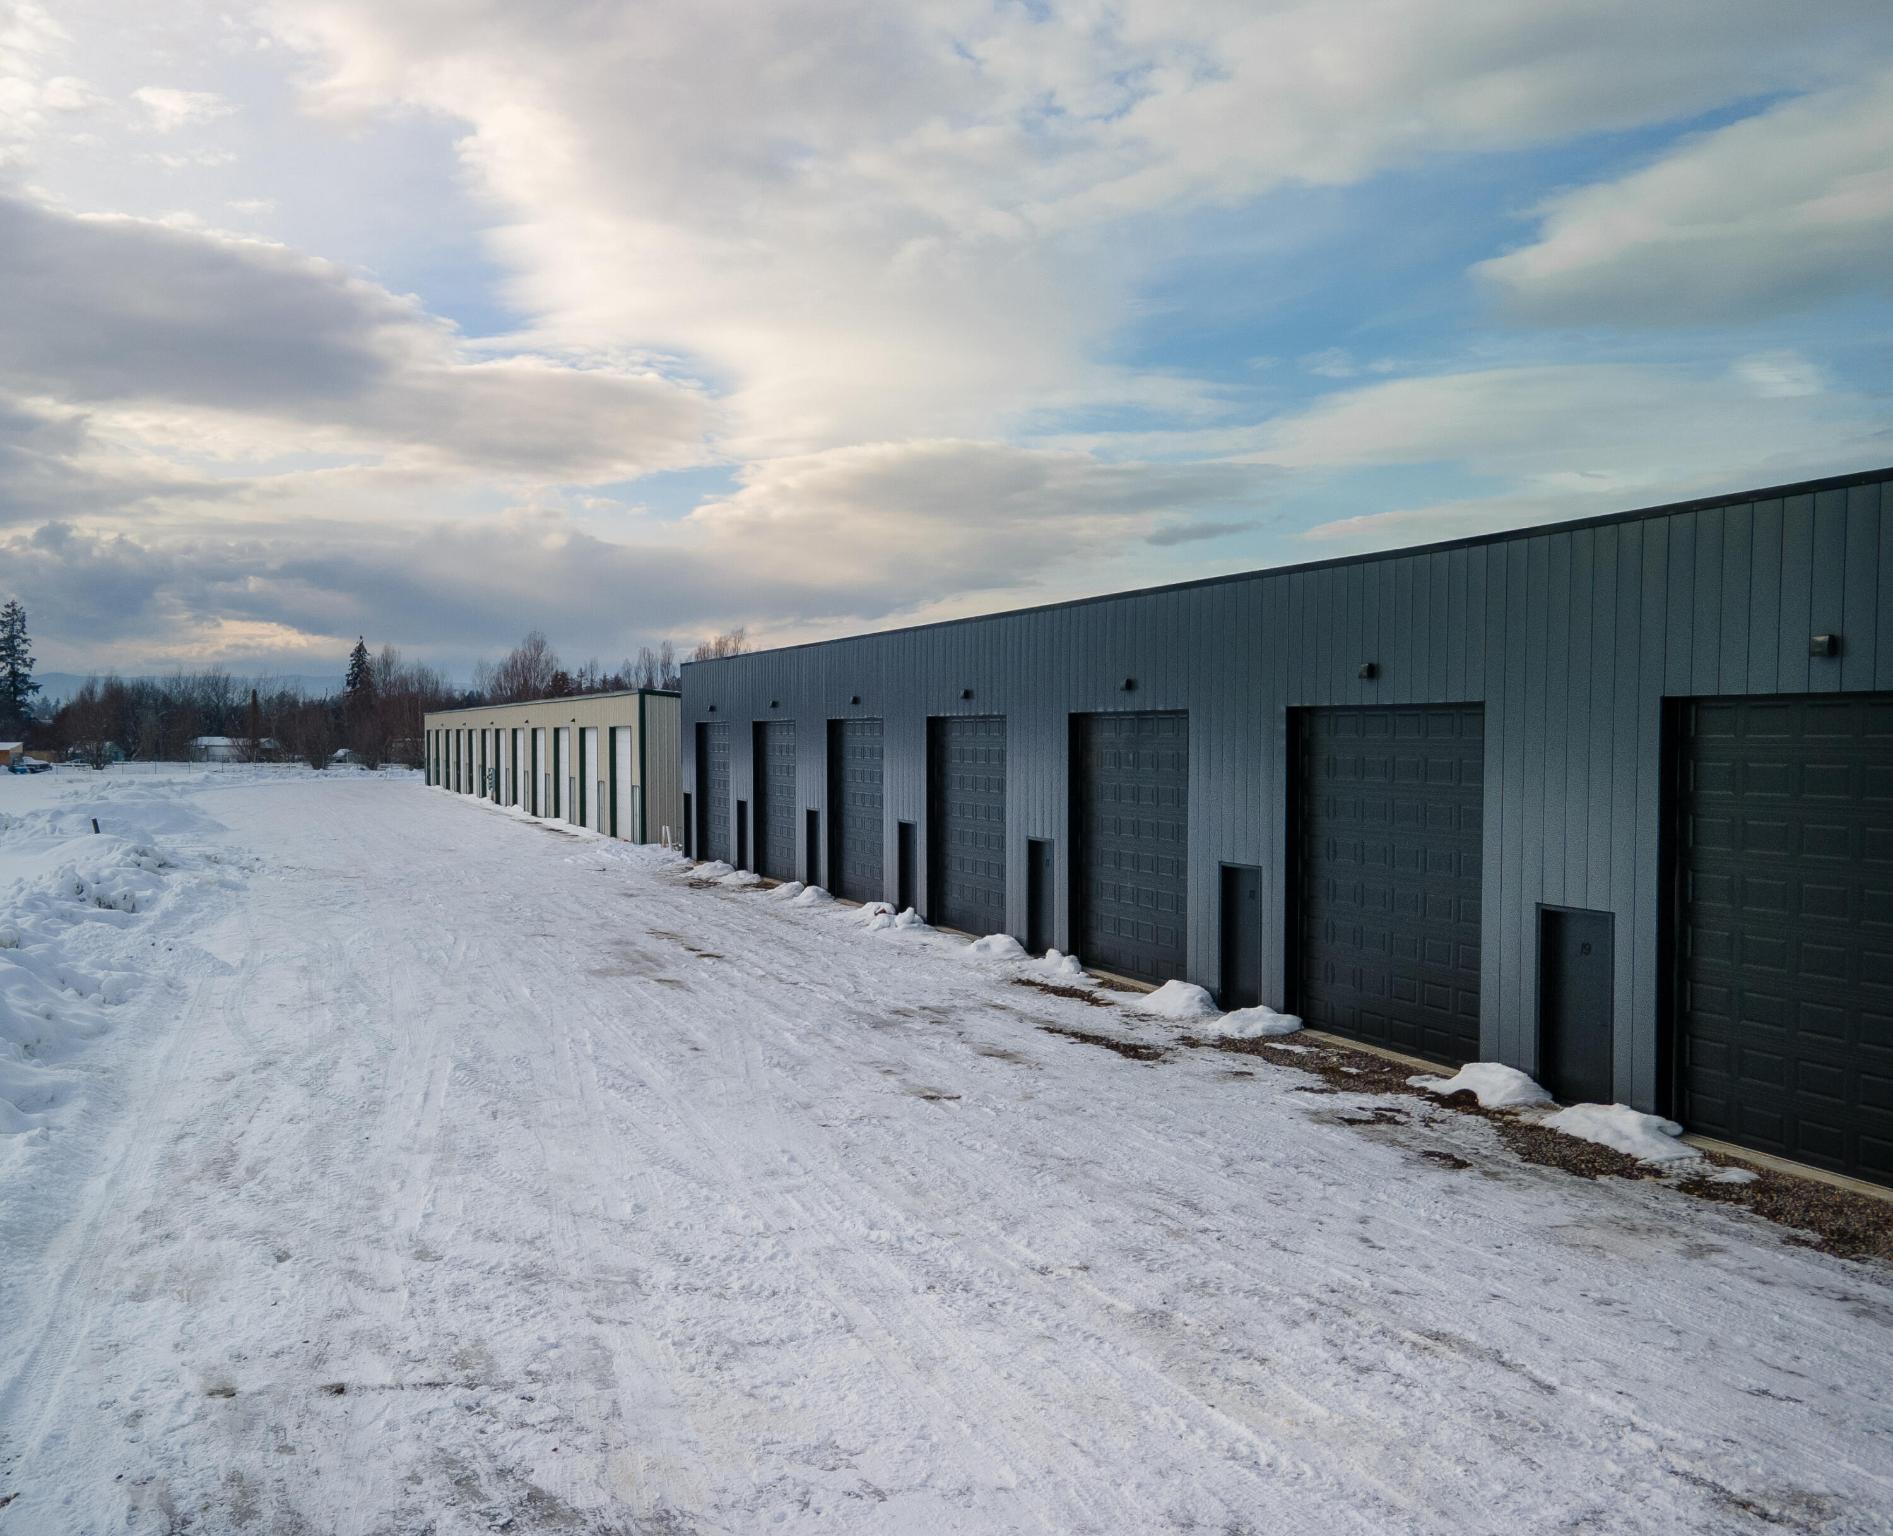 Here's your opportunity to own a brand new 20' by 50' storage condo with a 14' door. Ceilings are 14' tall in the back and 18' tall in the front. Use it to store your big toys, RV's, tools, etc. Need overflow storage for your business? Here's your answer. Need to move your small business somewhere bigger than your extra bedroom? Look no further. This is a new build and will have updated finishings compared to the existing units. Contact Kristin Zuckerman (406) 291-0778, or your real estate professional